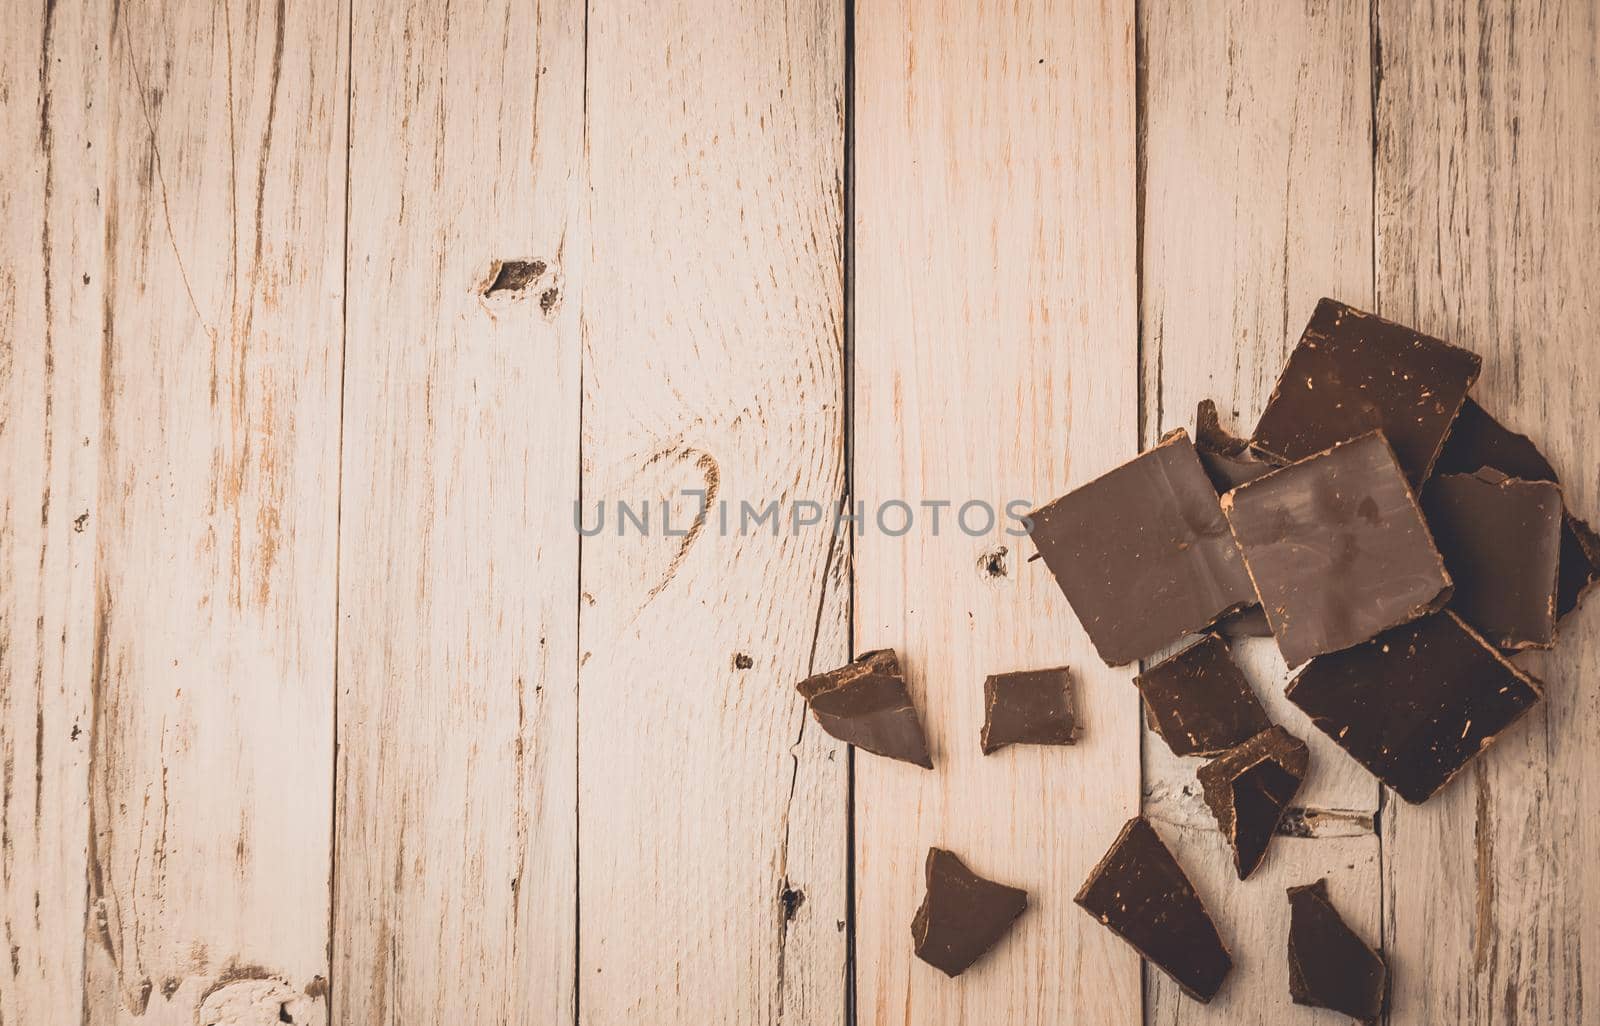 dark chocolate without sugar and gluten free for diabetics and allergics. Black chocolate broken into pieces lies on a white painted table in a rustic style. Dark toning. Copy space.